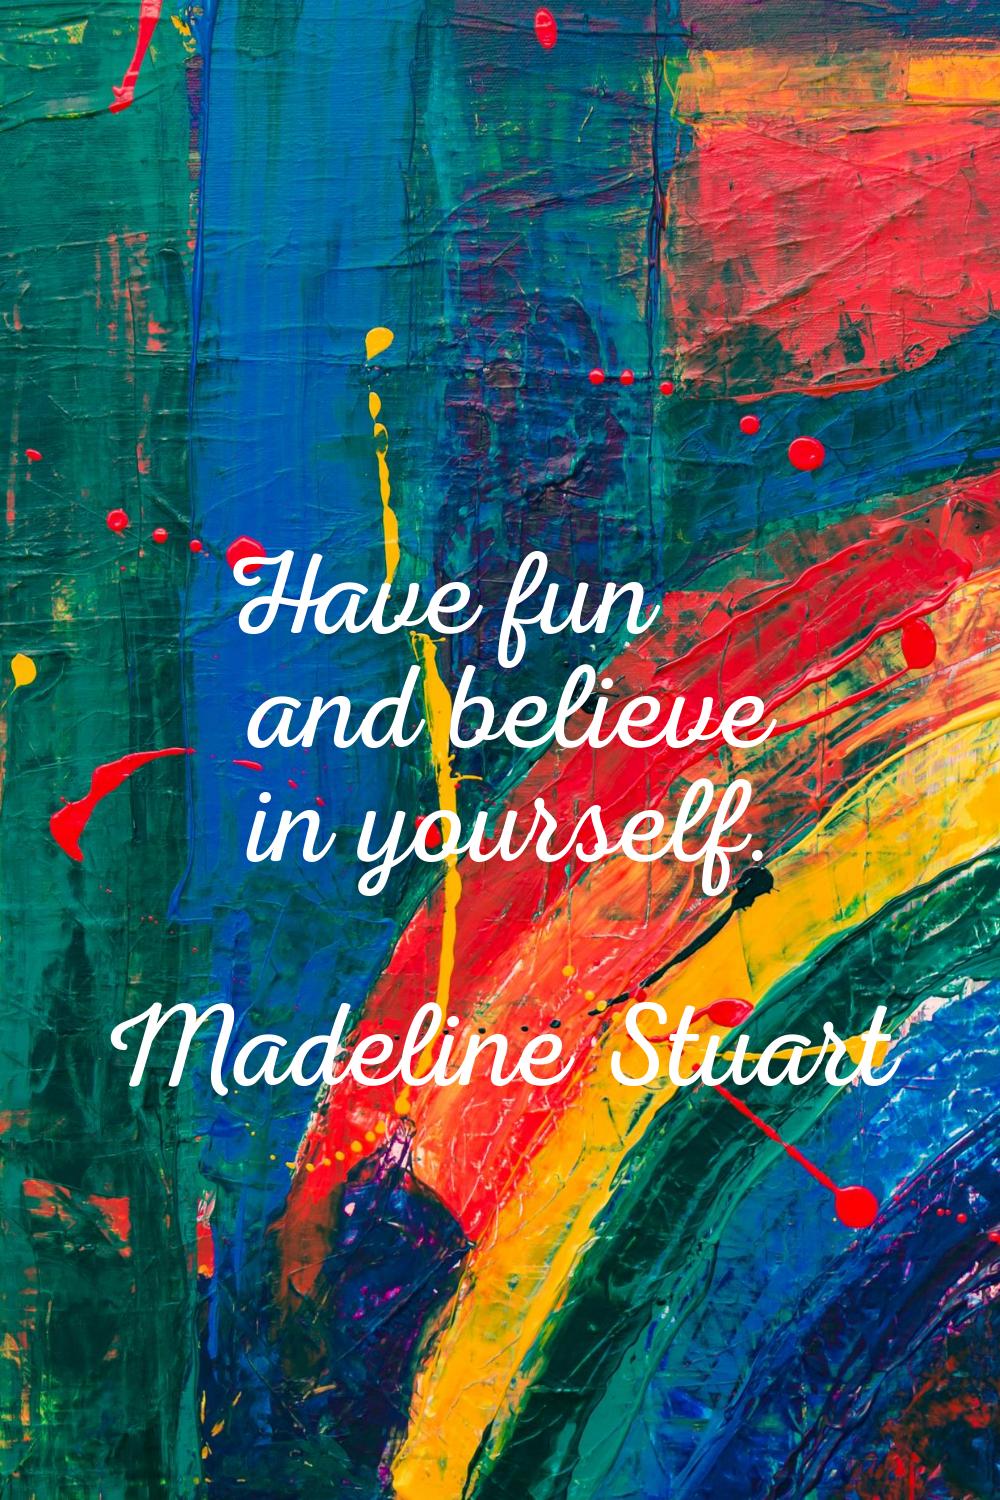 Have fun and believe in yourself.